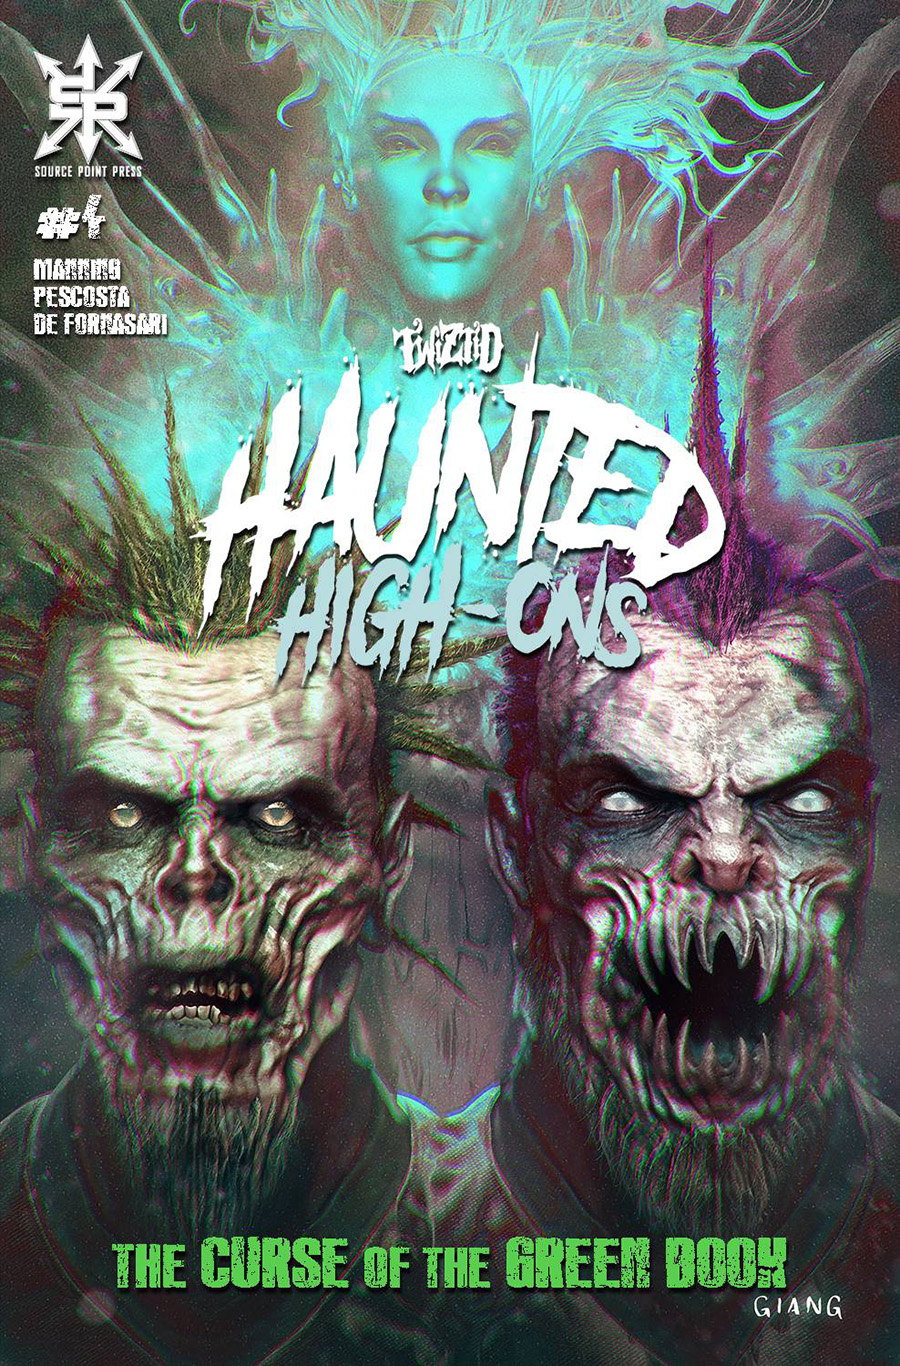 Twiztid Haunted High-Ons The Curse Of The Green Book #4 Cover B Variant John Giang Cover